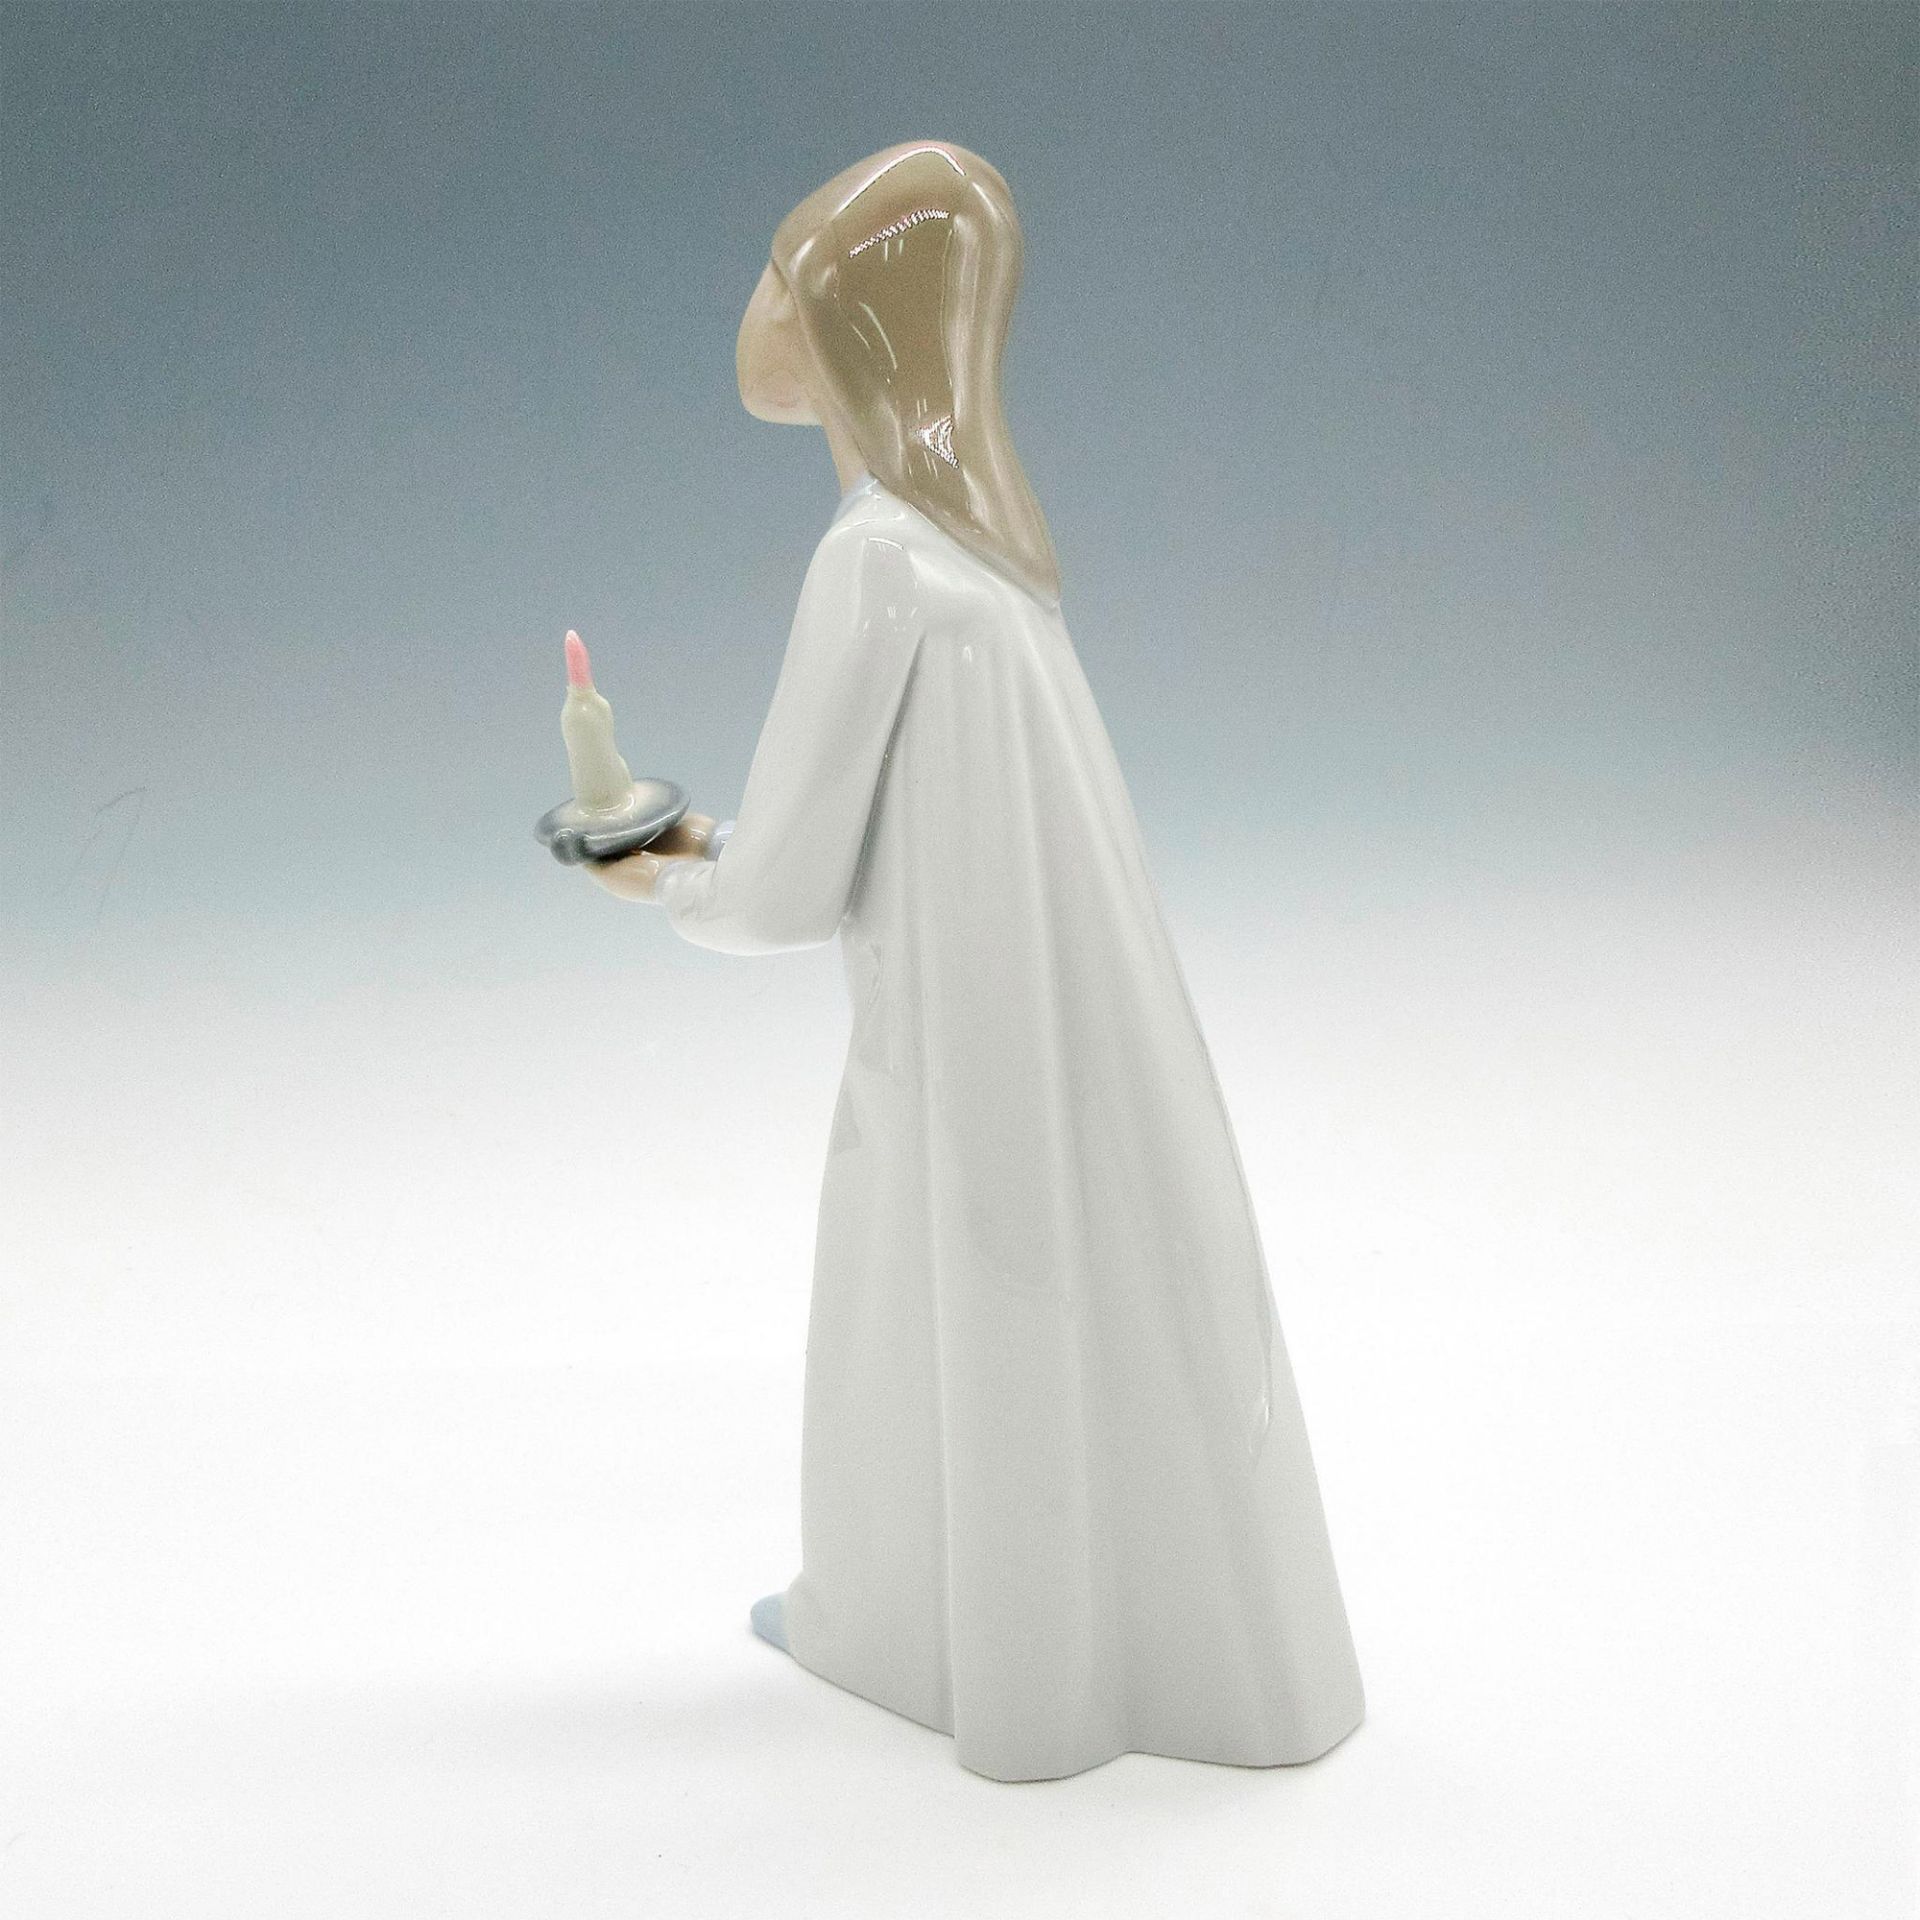 Girl with Candle 1004868 - Lladro Porcelain Figurine - Image 2 of 3